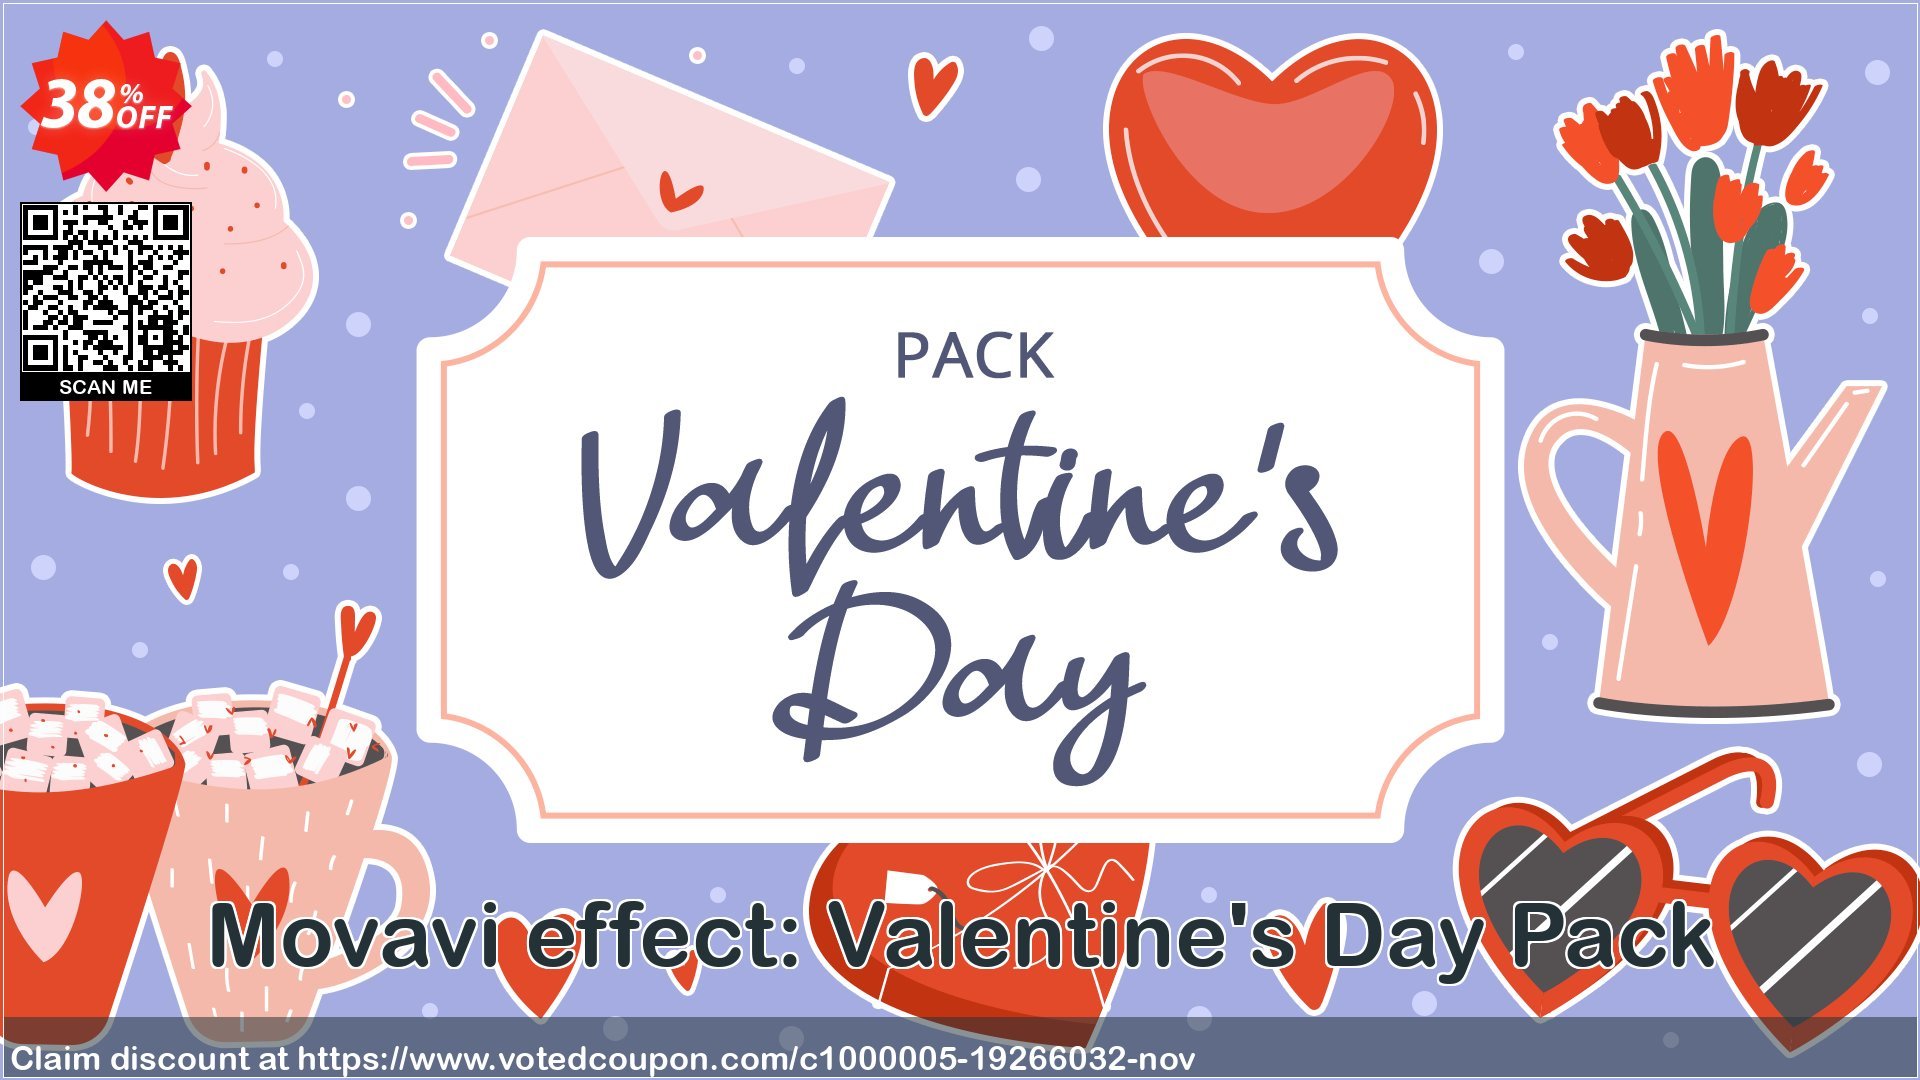 Movavi effect: Valentine's Day Pack Coupon Code May 2024, 38% OFF - VotedCoupon